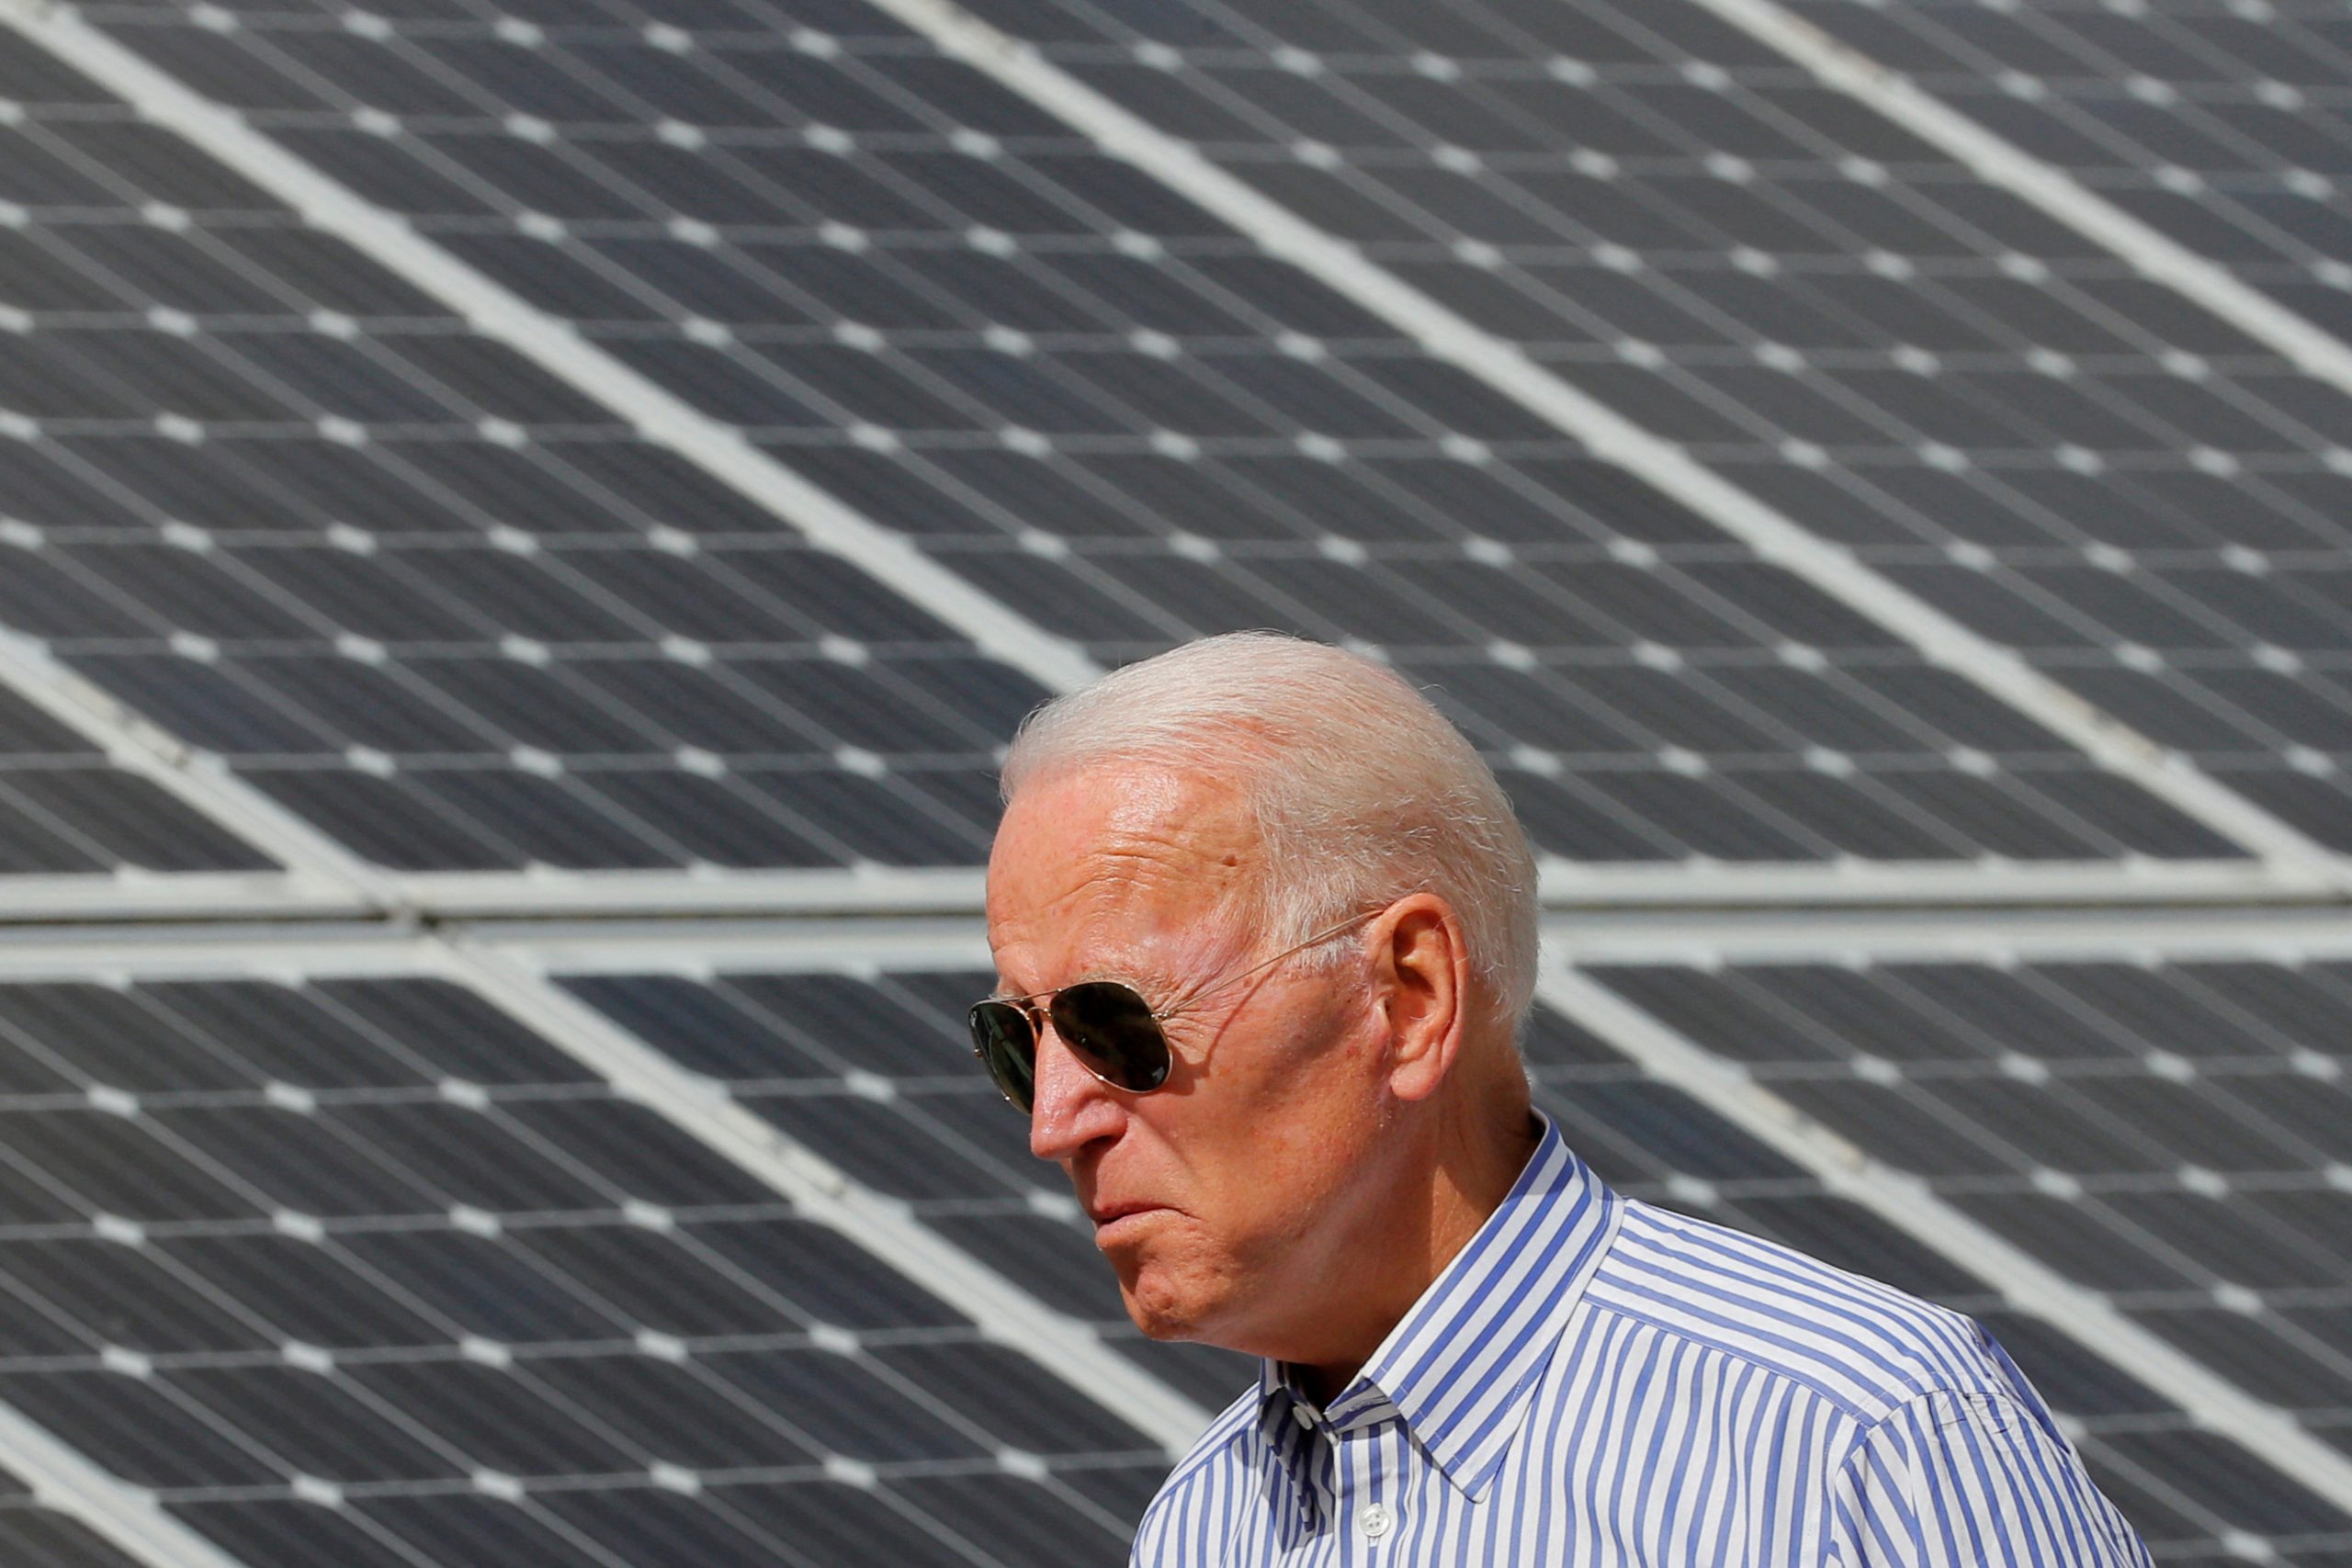 Foreign companies are the top beneficiaries of Biden’s climate funding.